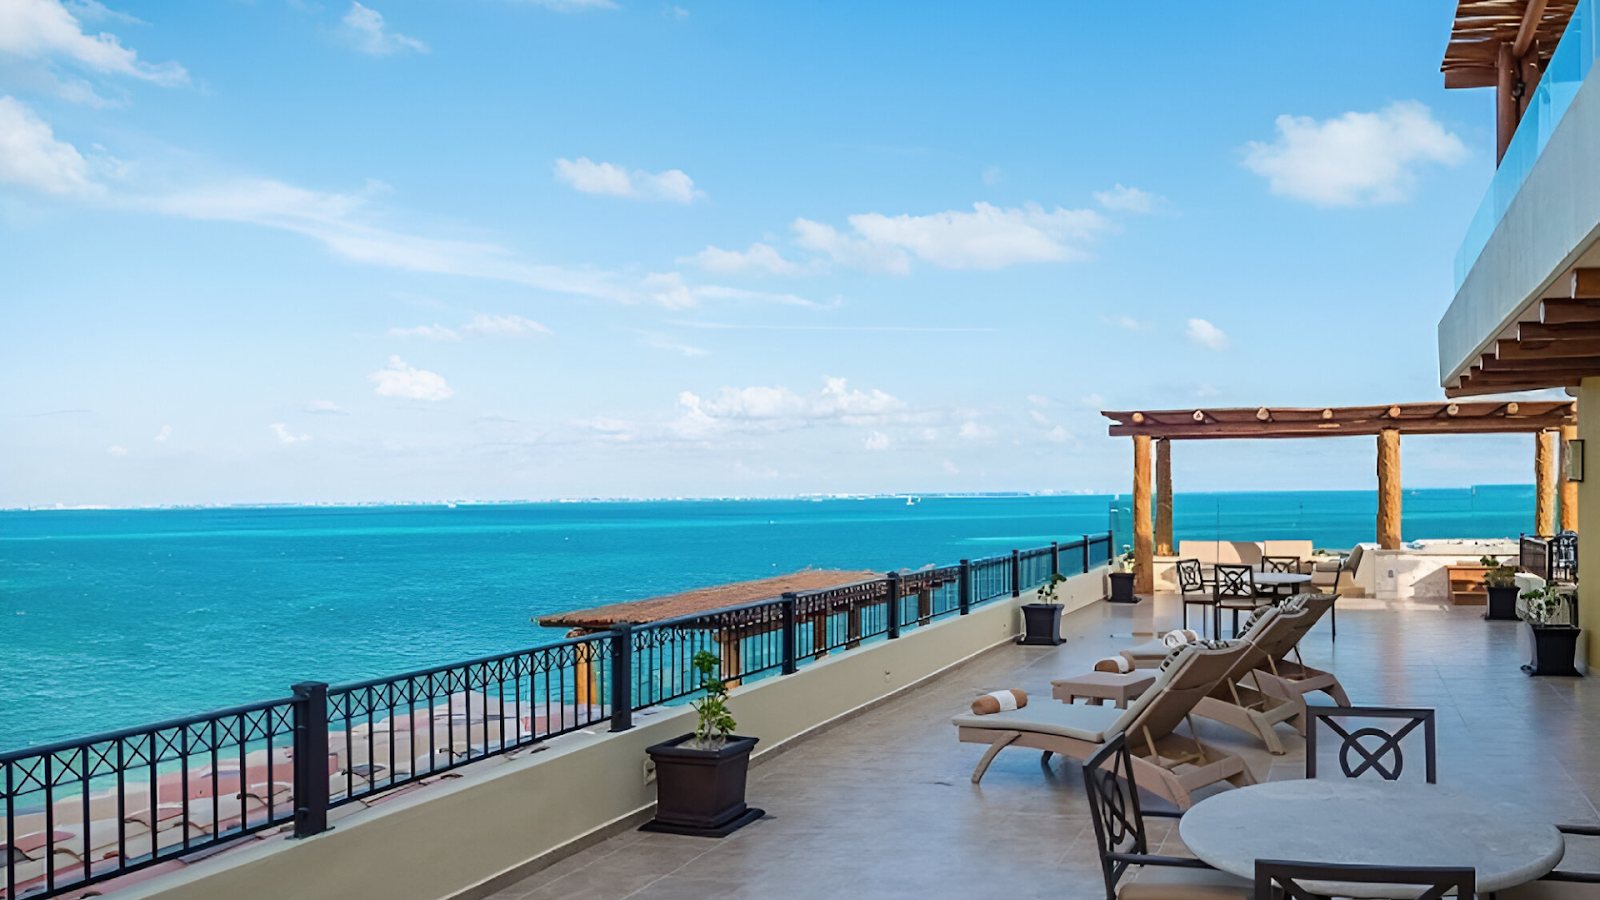 A balcony with a breathtaking view of the Caribbean Sea